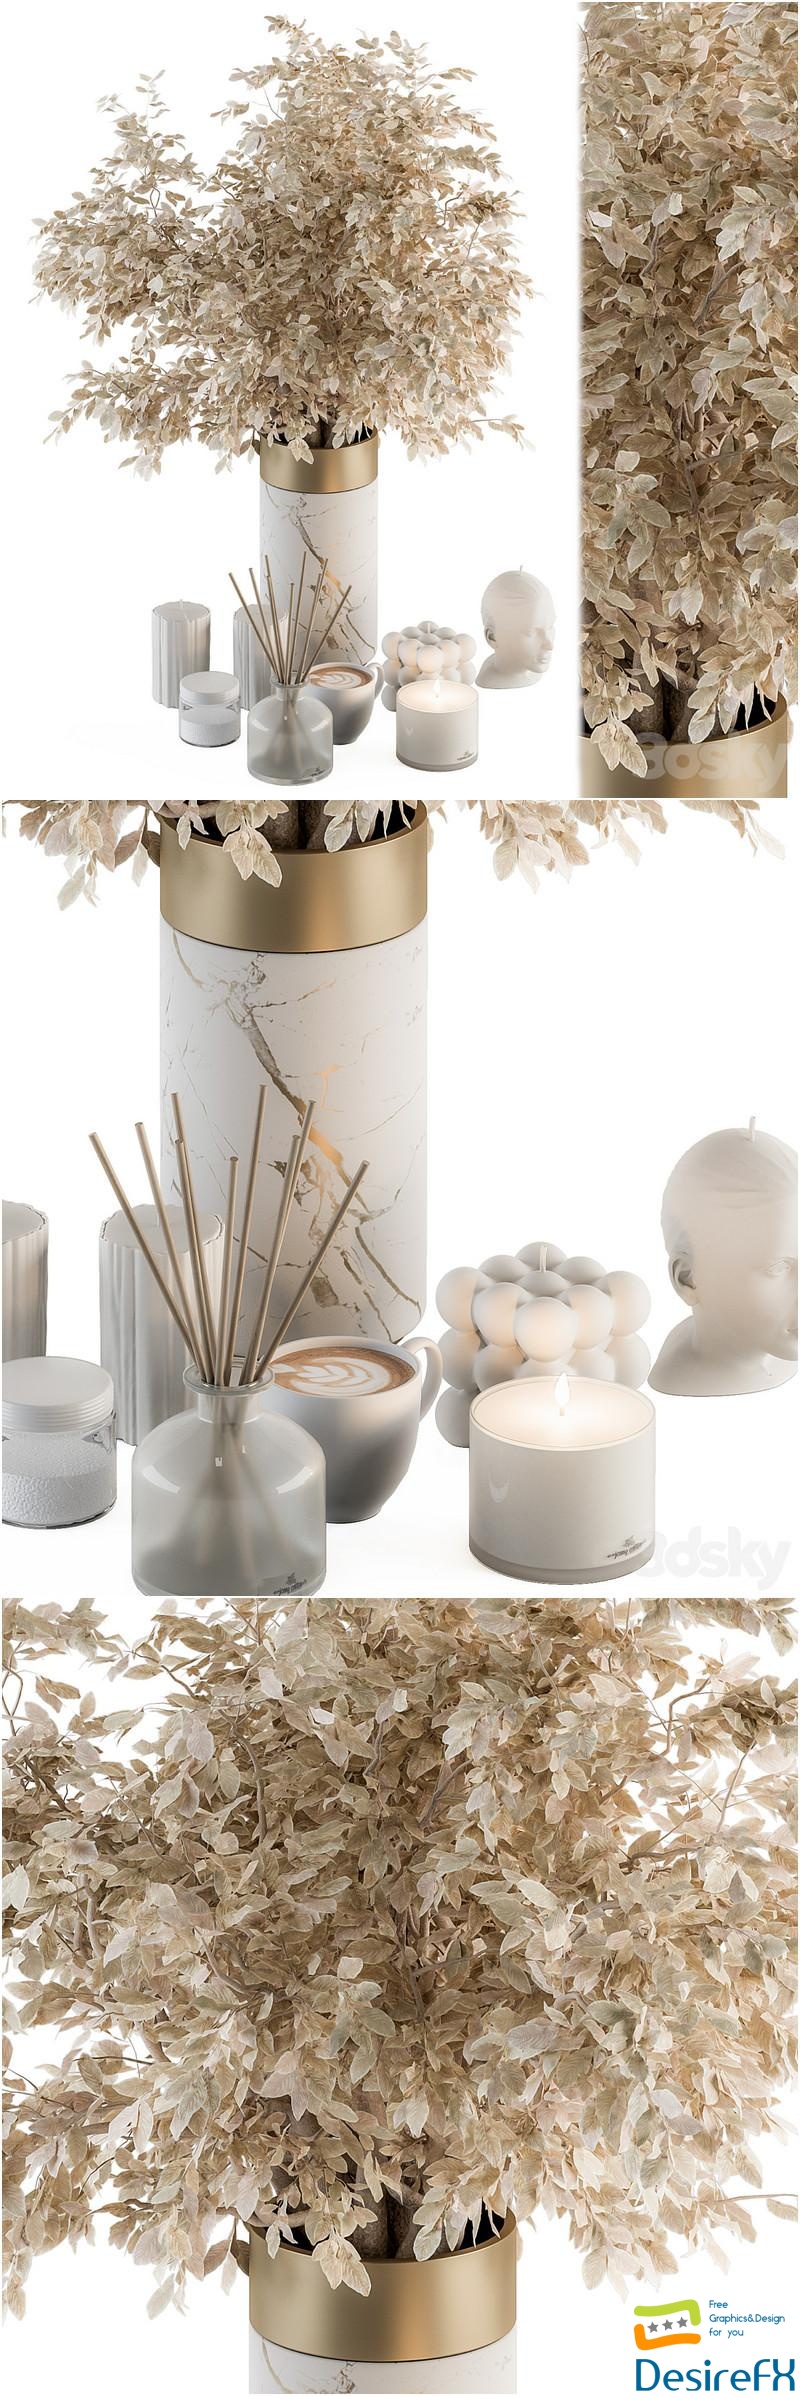 White and Gold Decorative Set with Dried plant - Set 106 3D Model